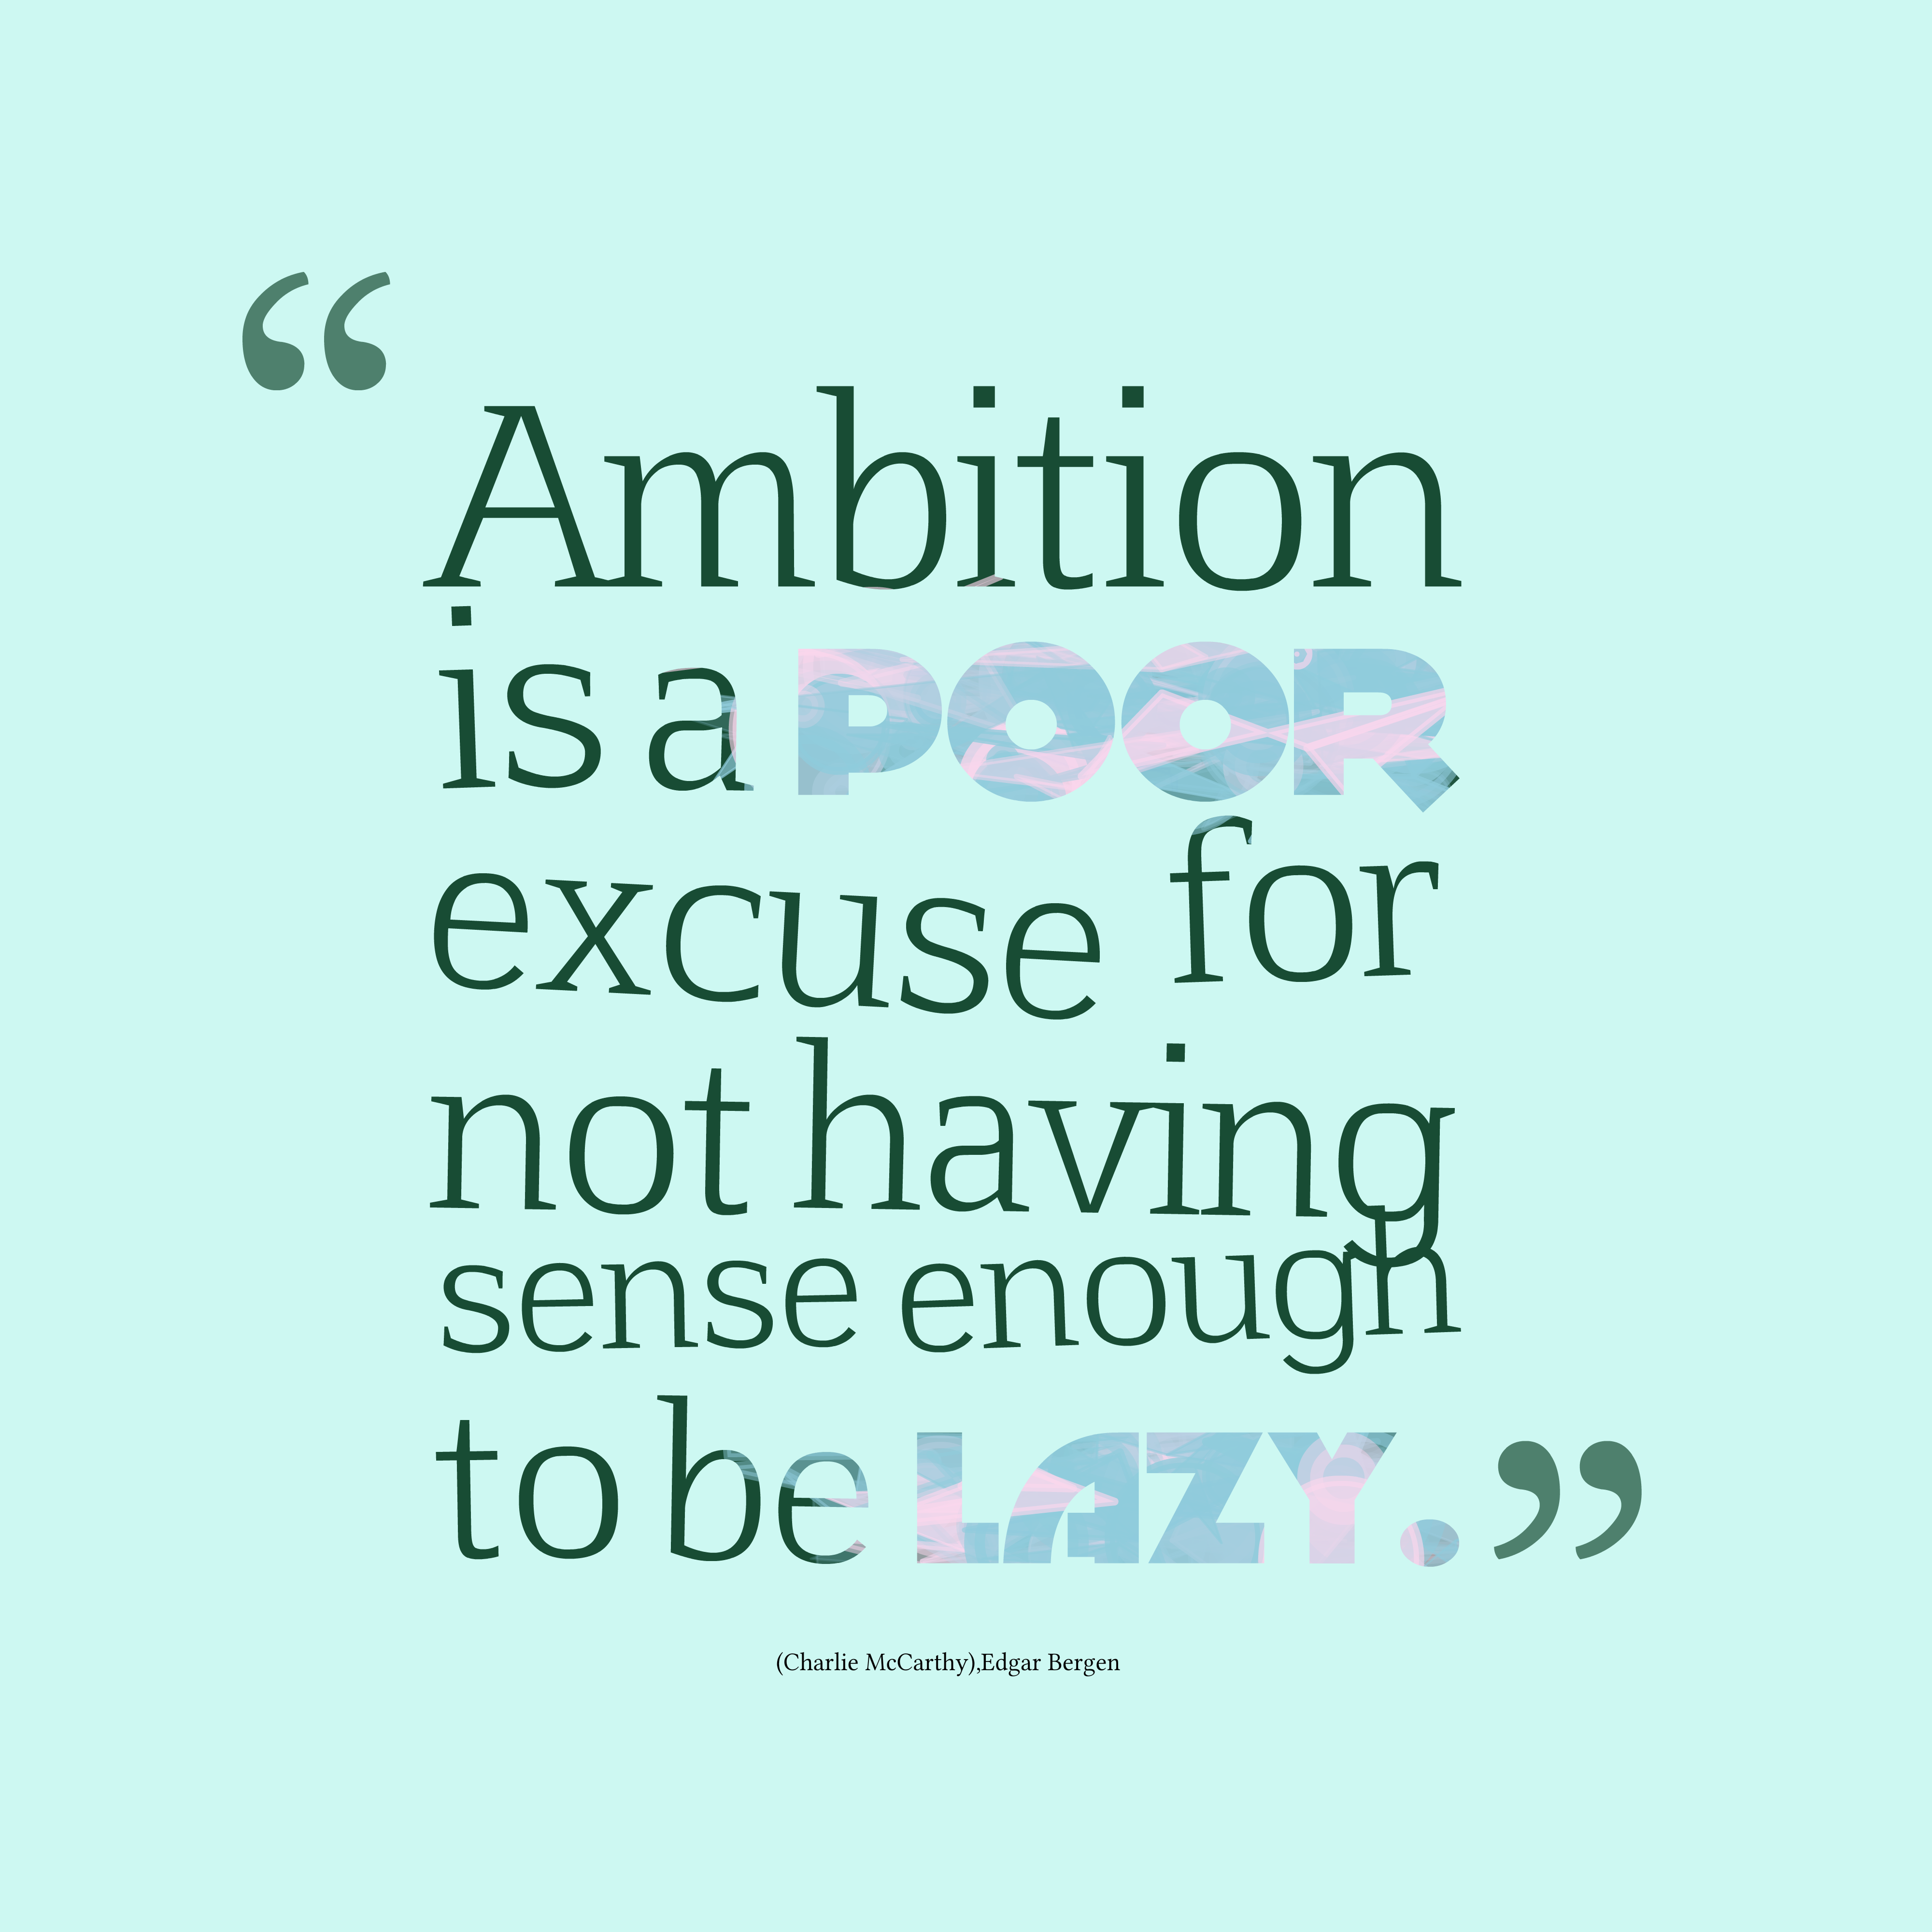 Ambition is a poor excuse for not having sense enough to be lazy. Milan Kundera